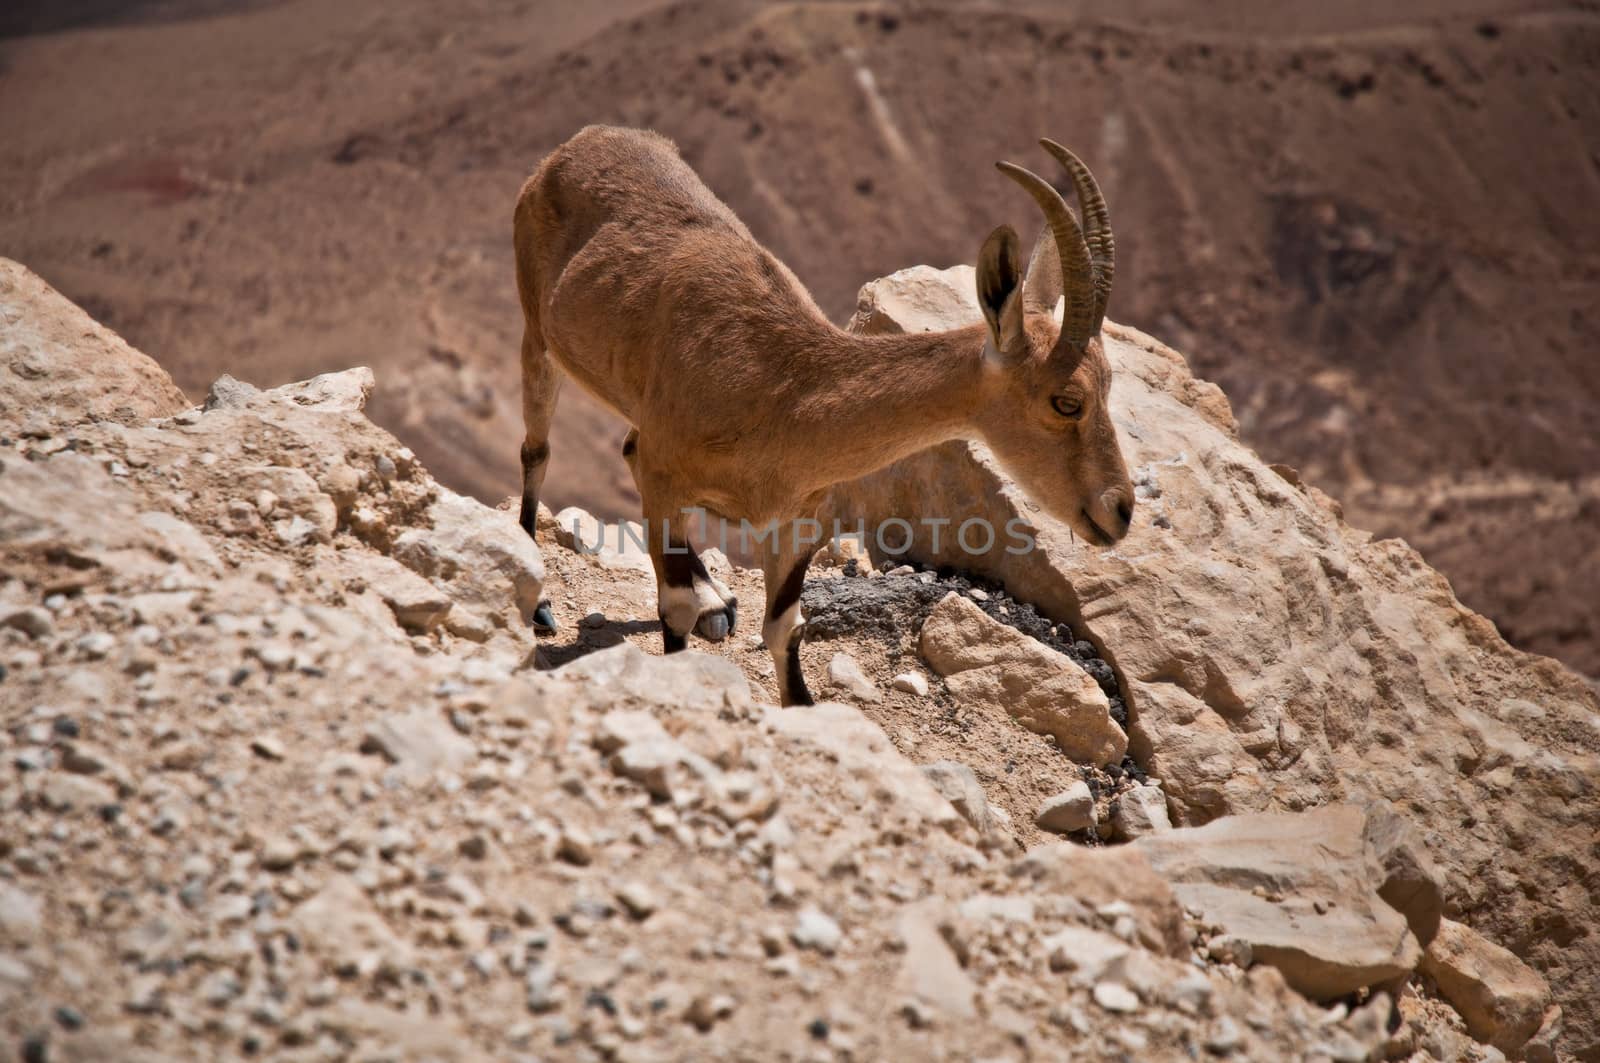 Ibex in the Negev desert. Israel by LarisaP